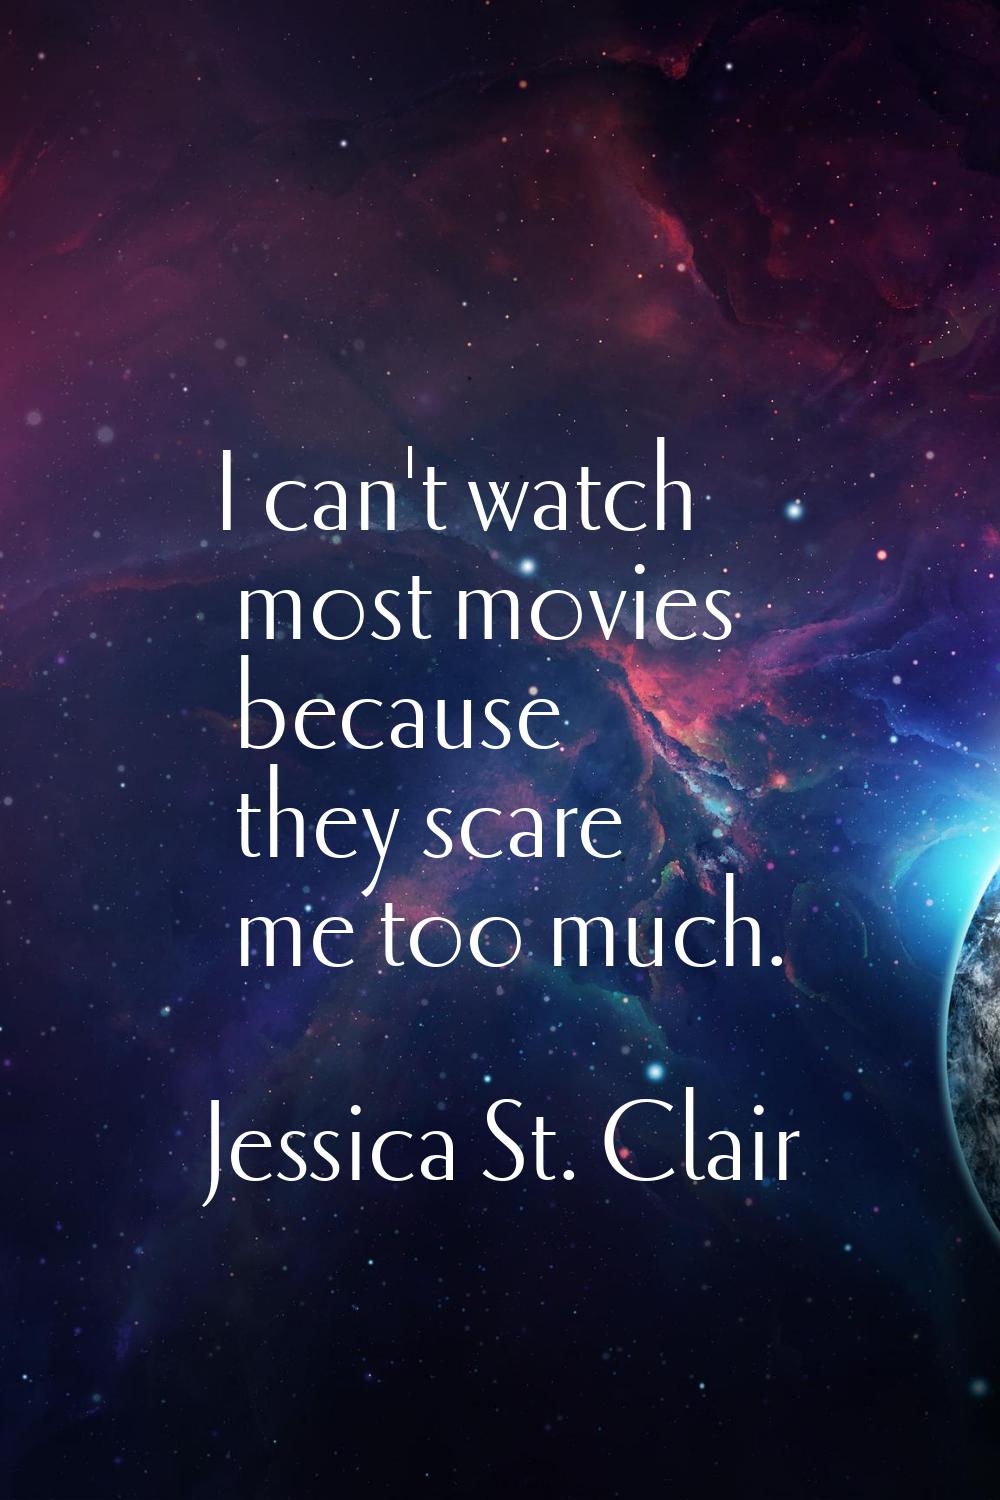 I can't watch most movies because they scare me too much.